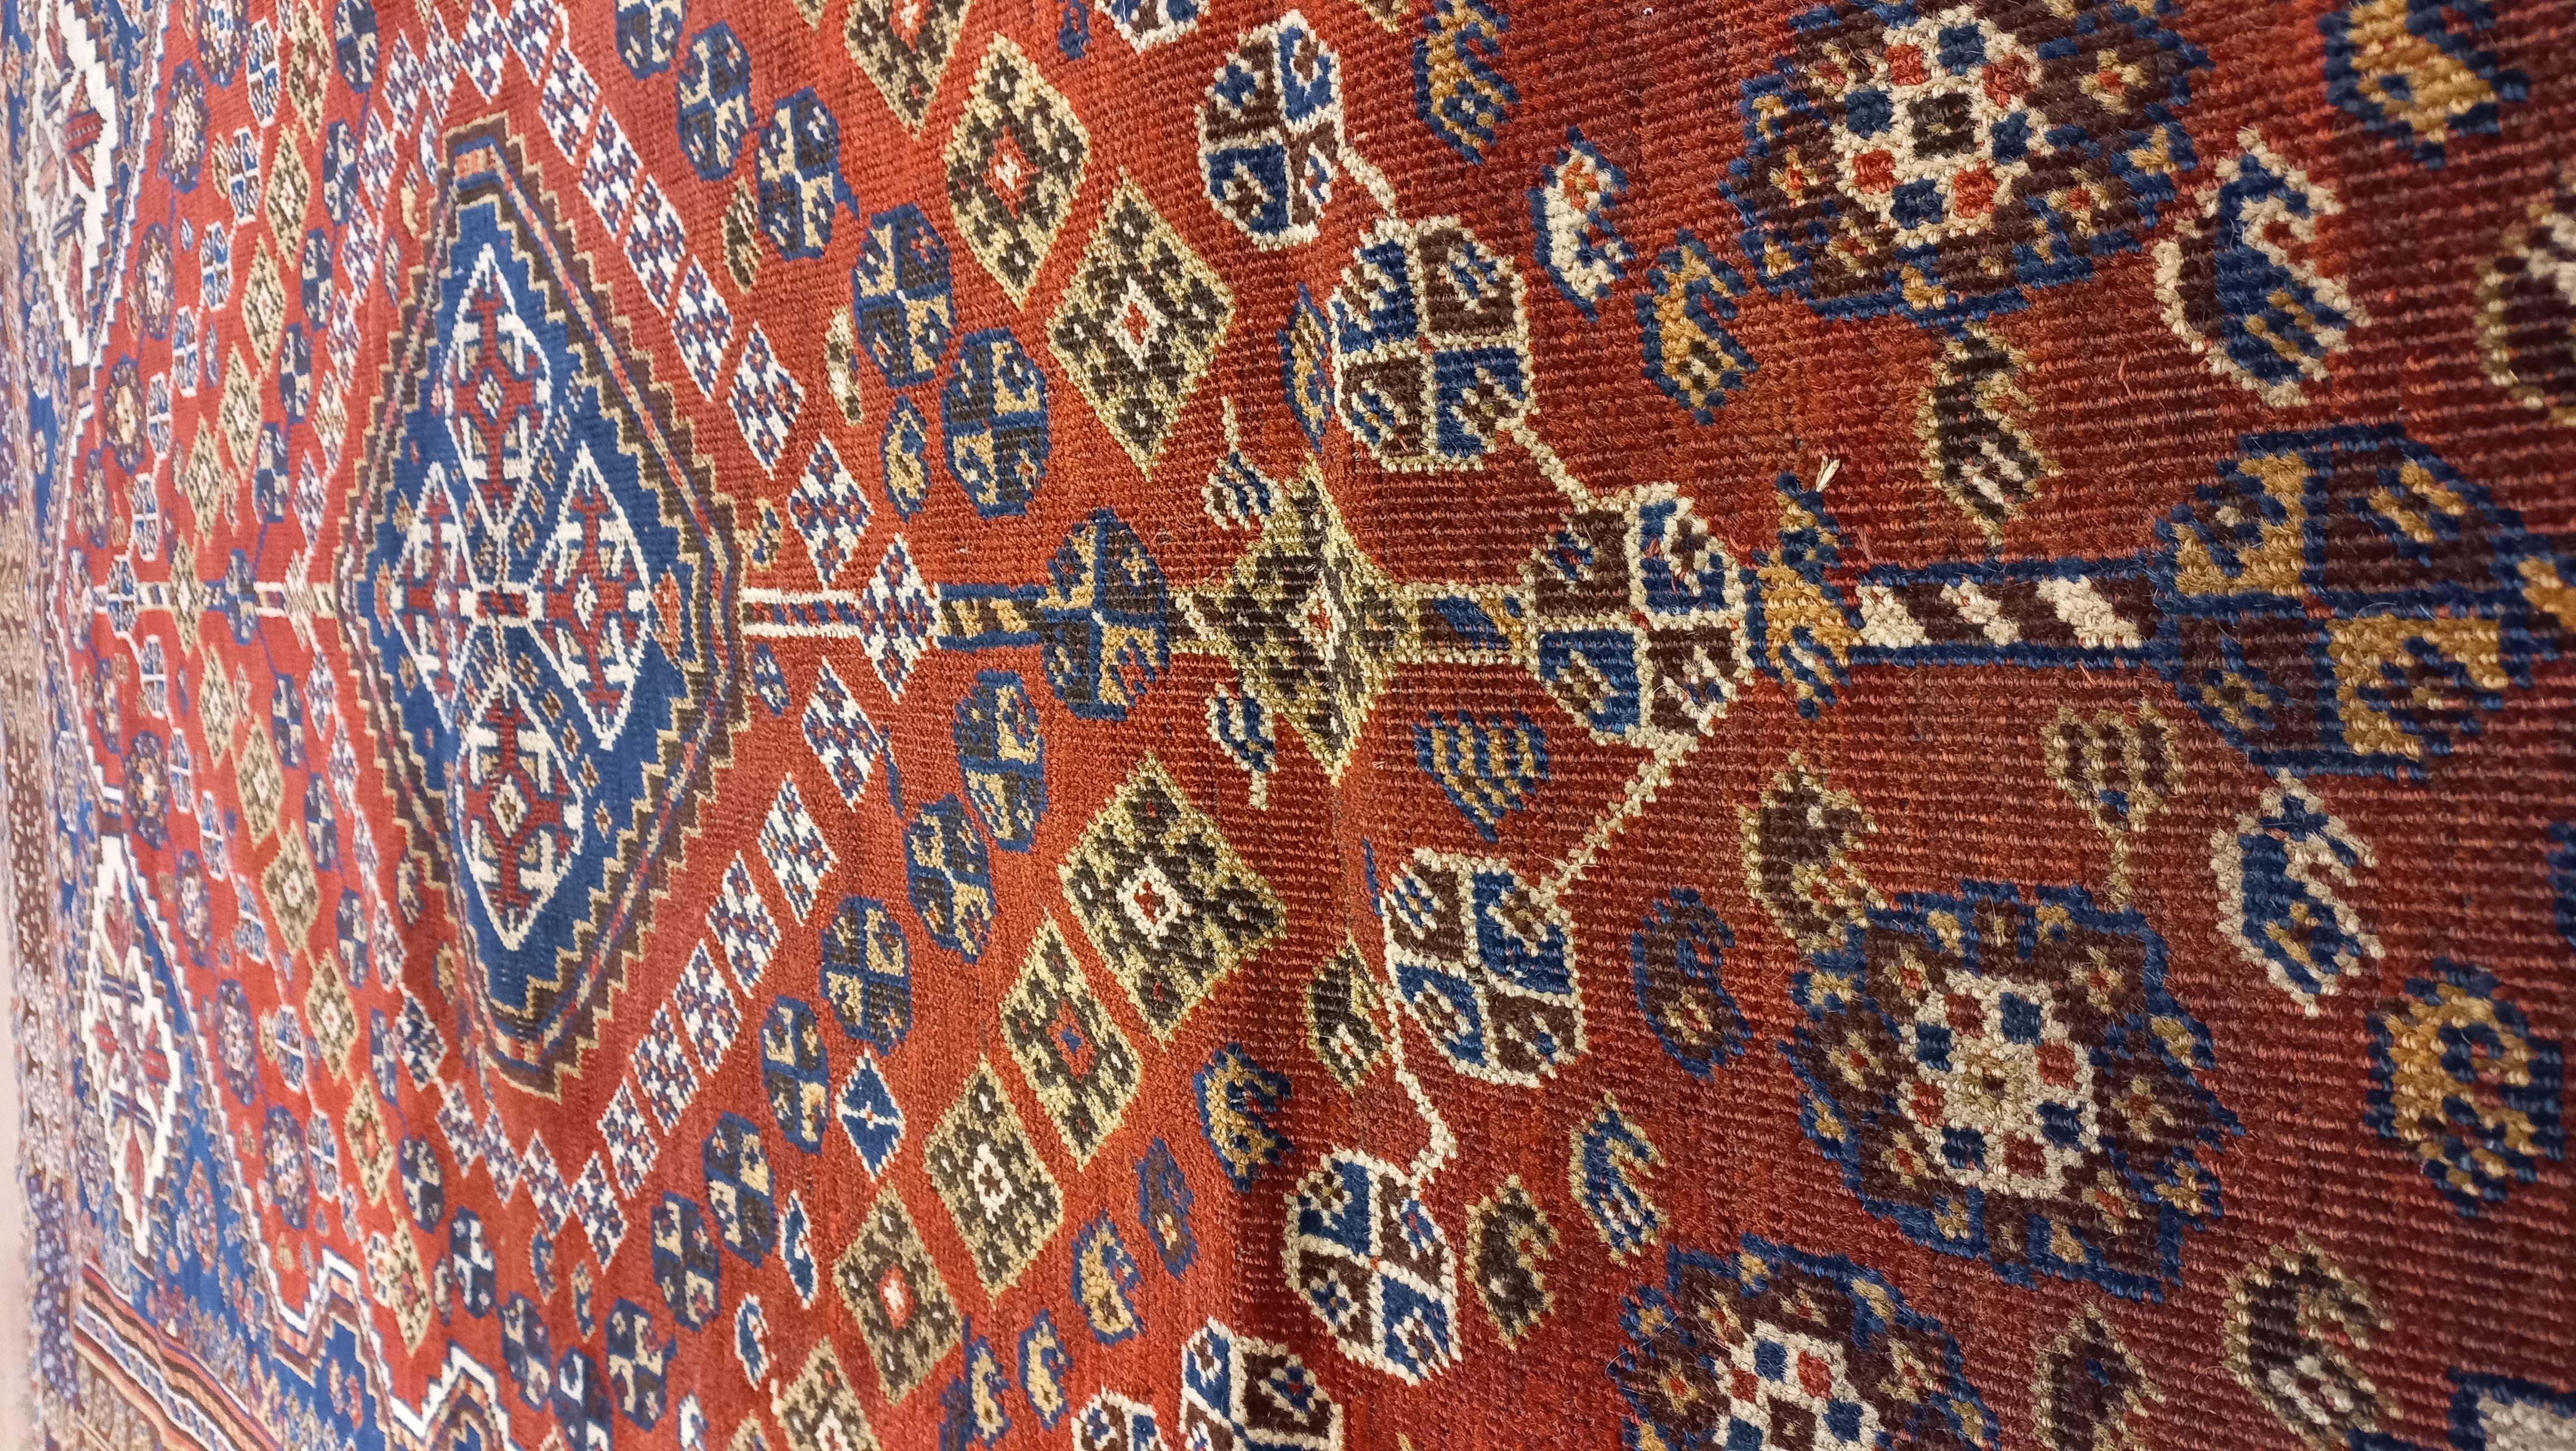 4.6x6.6 Ft Antique Persian Shiraz Qashqai Rug. All Wool & Natural Vegetable Dyes In Good Condition For Sale In Philadelphia, PA